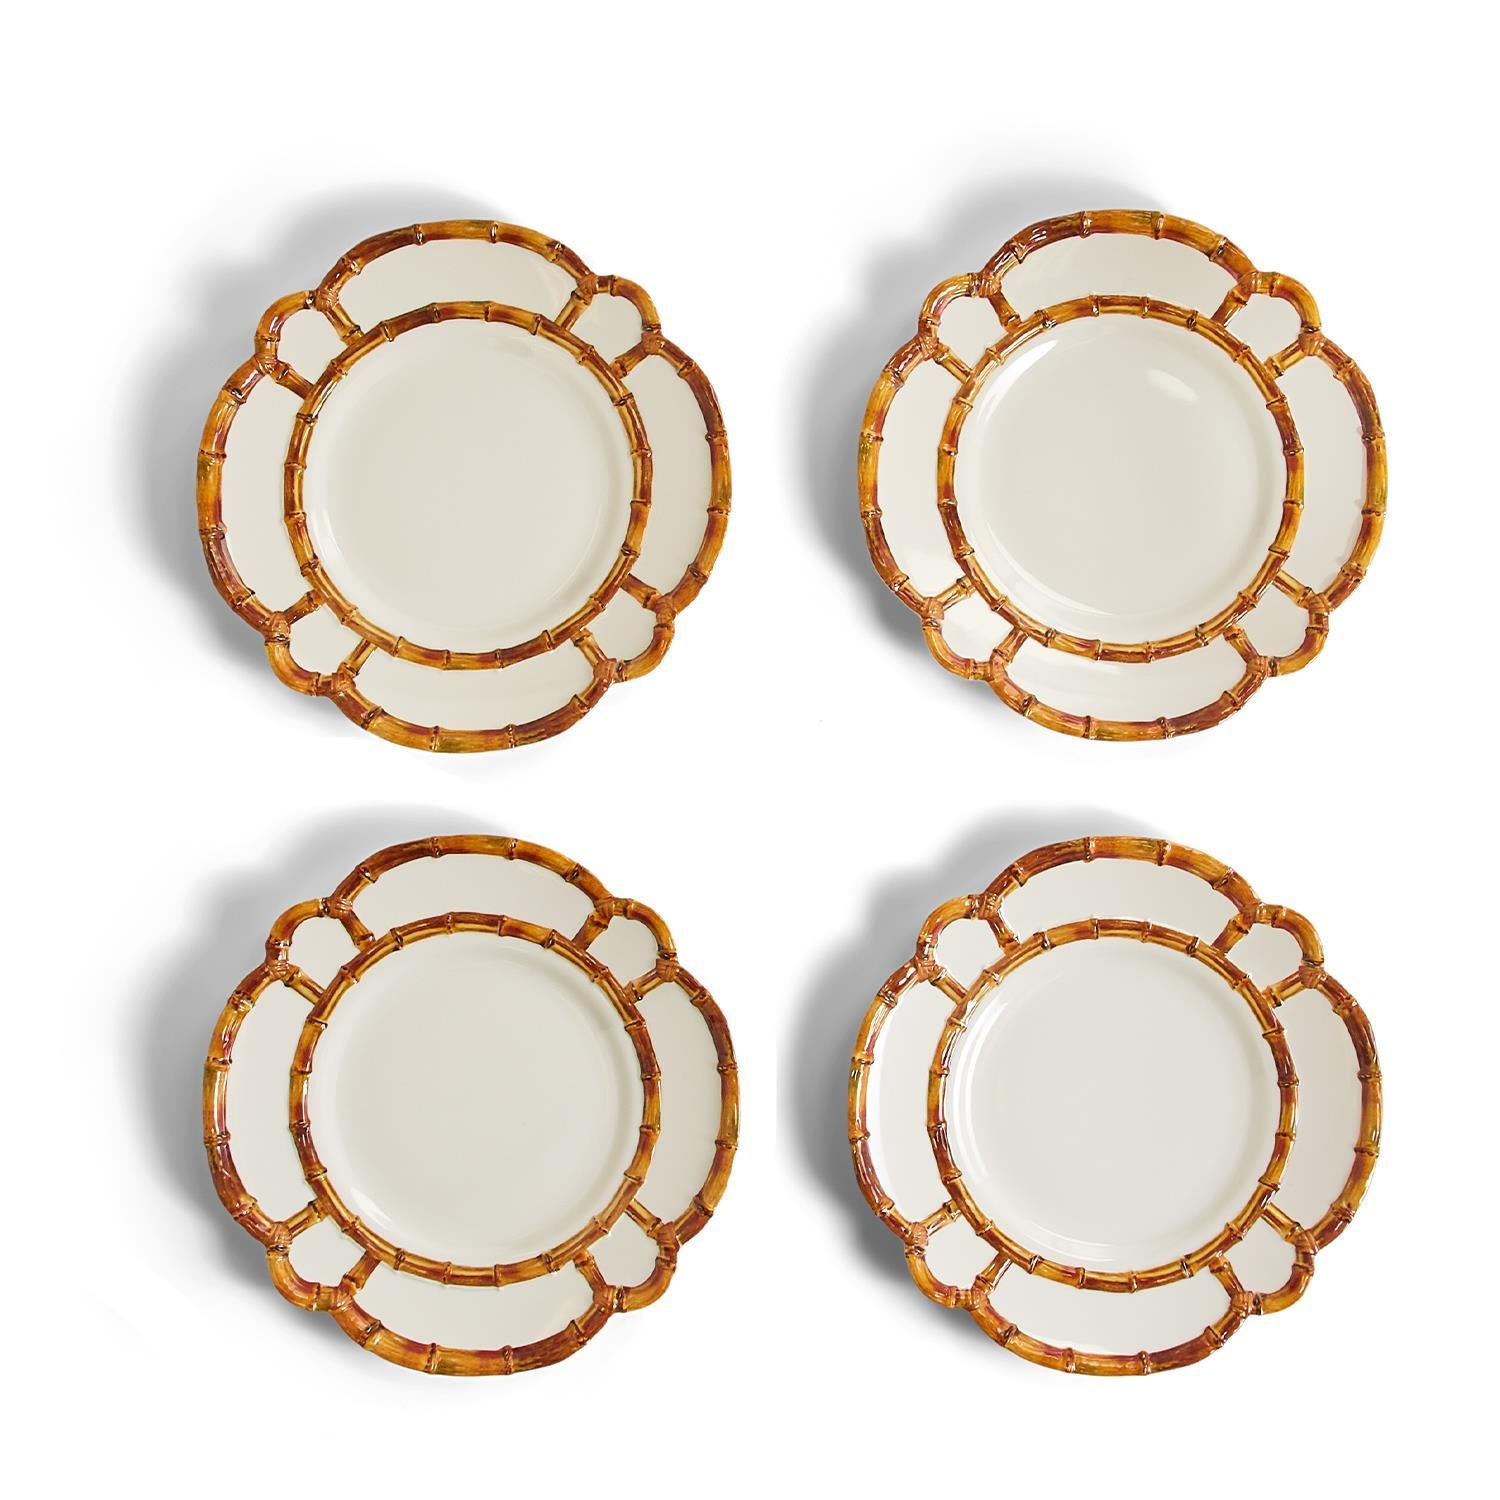 Two's Company S/4 Bamboo Touch Dinner Plate